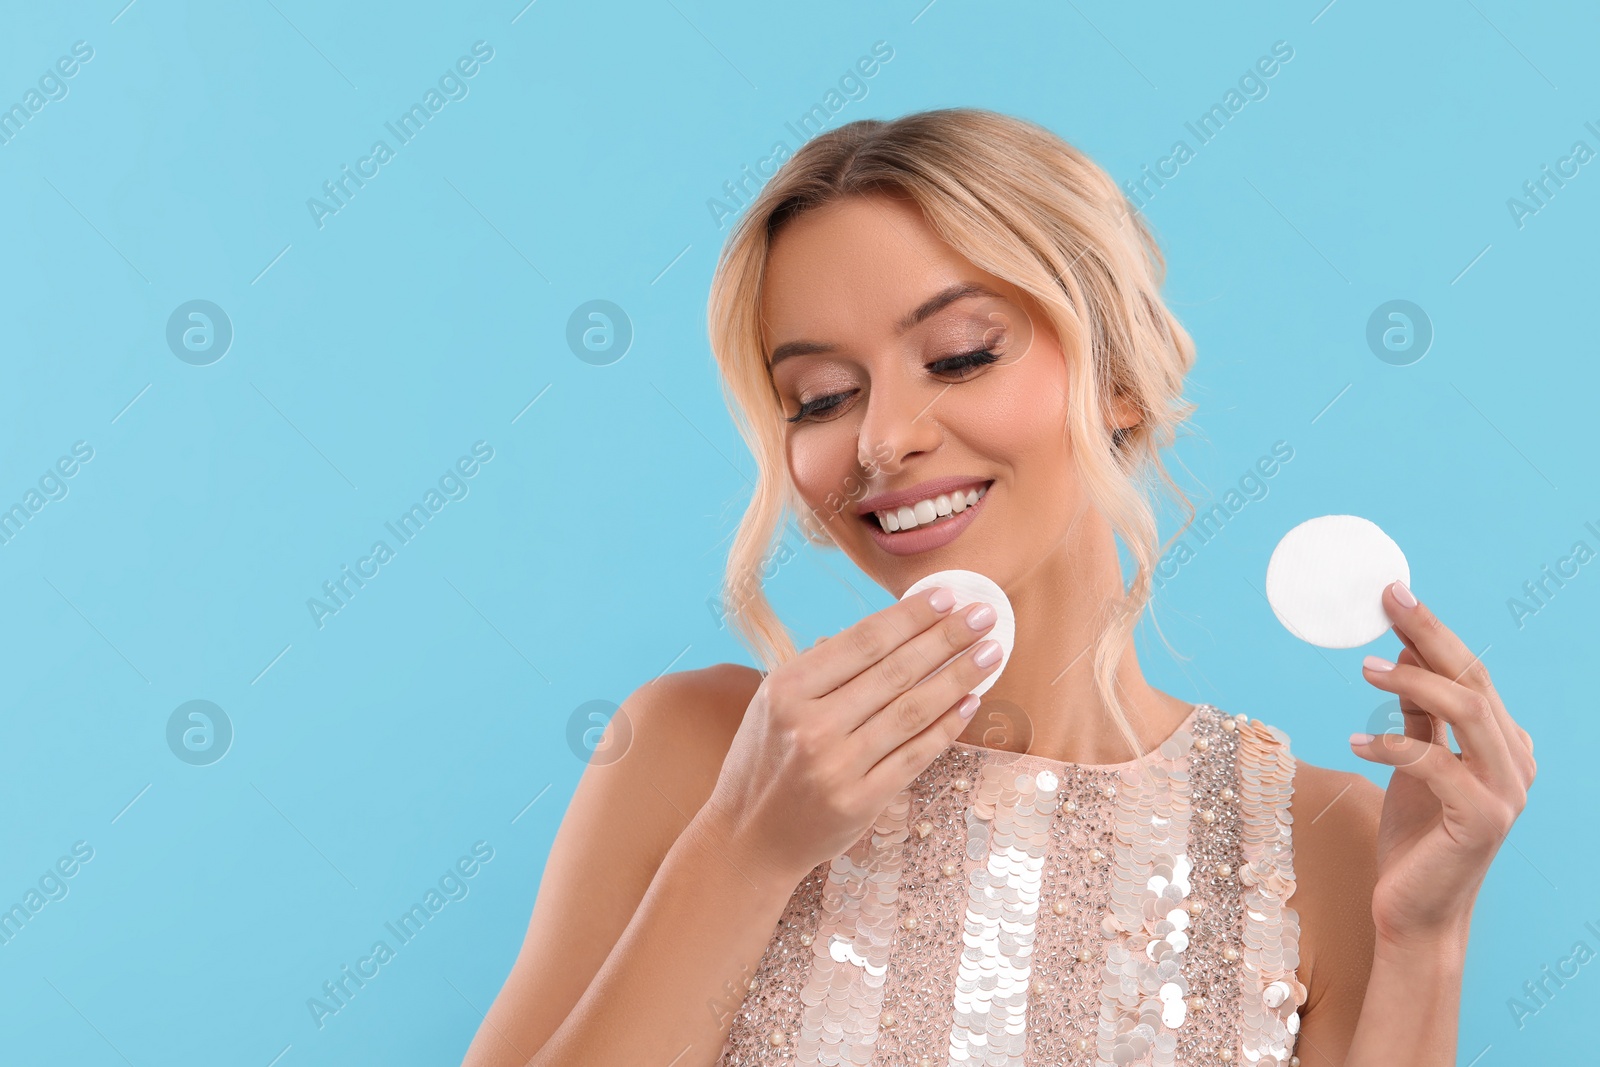 Photo of Smiling woman removing makeup with cotton pads on light blue background. Space for text